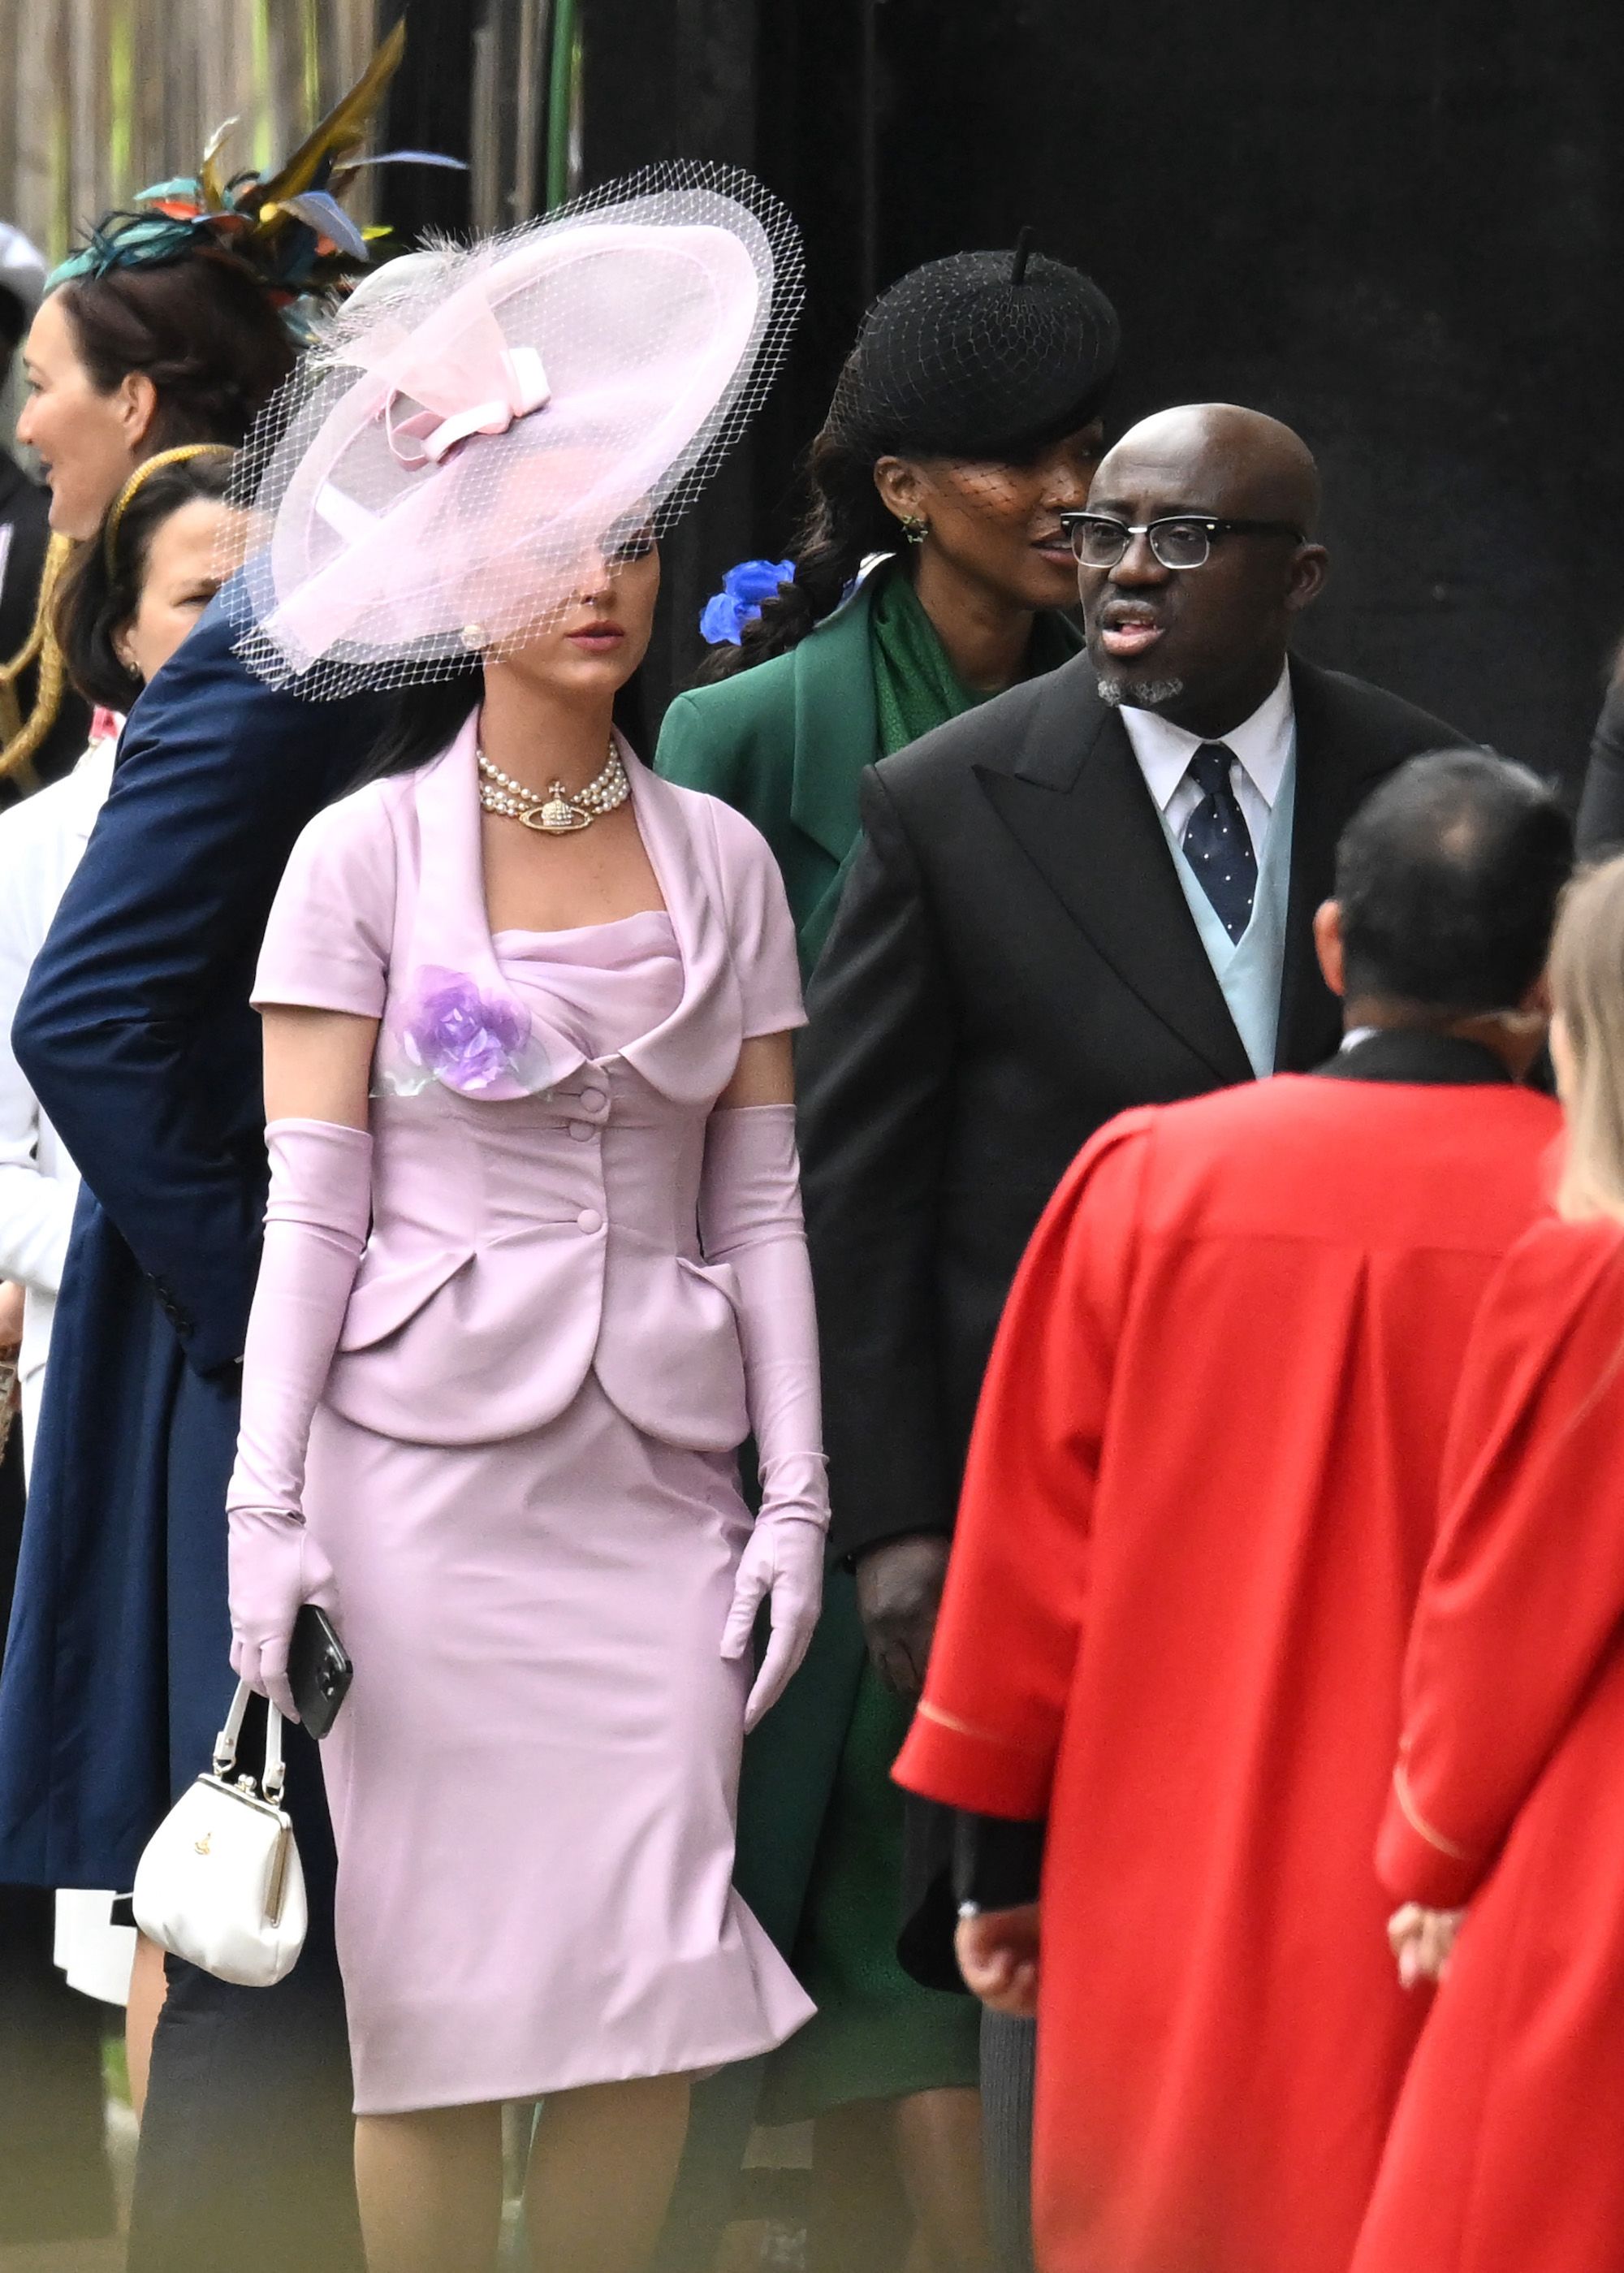 Fashion at the Coronation: What the guests wore